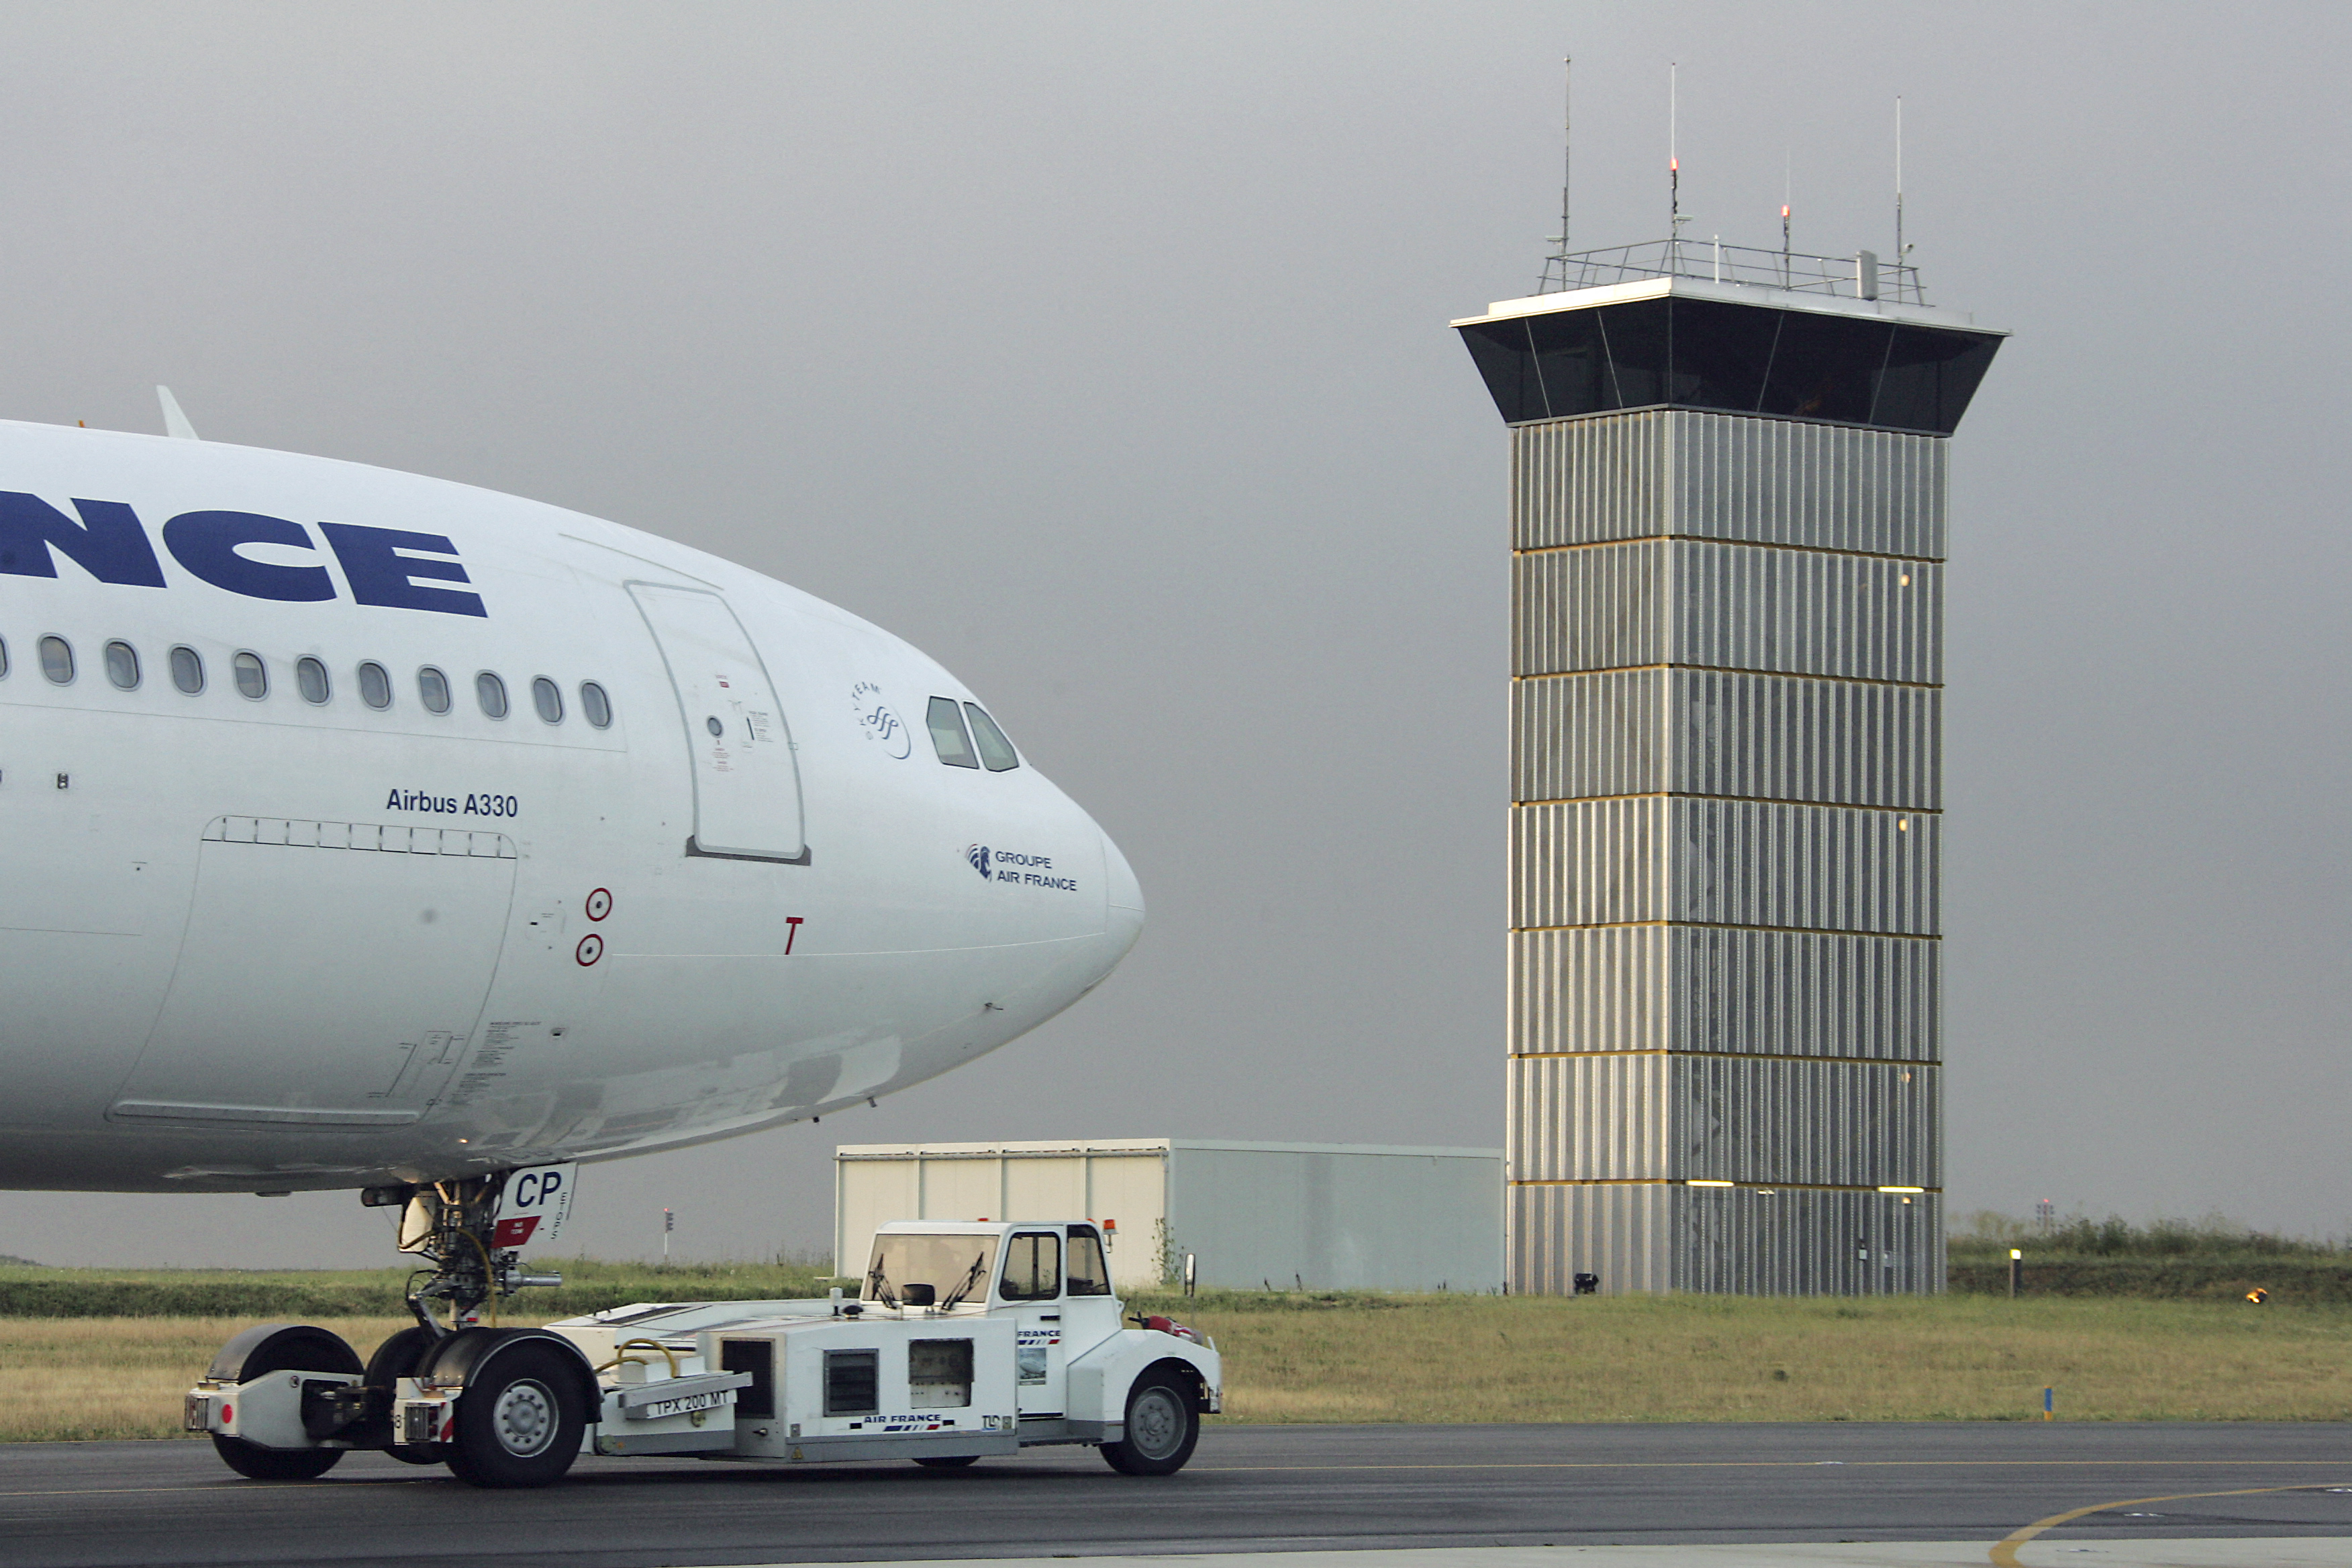 An Airbus A330 under Air France approaching the traffic control tower in Paris in 2006 | Source: Getty images